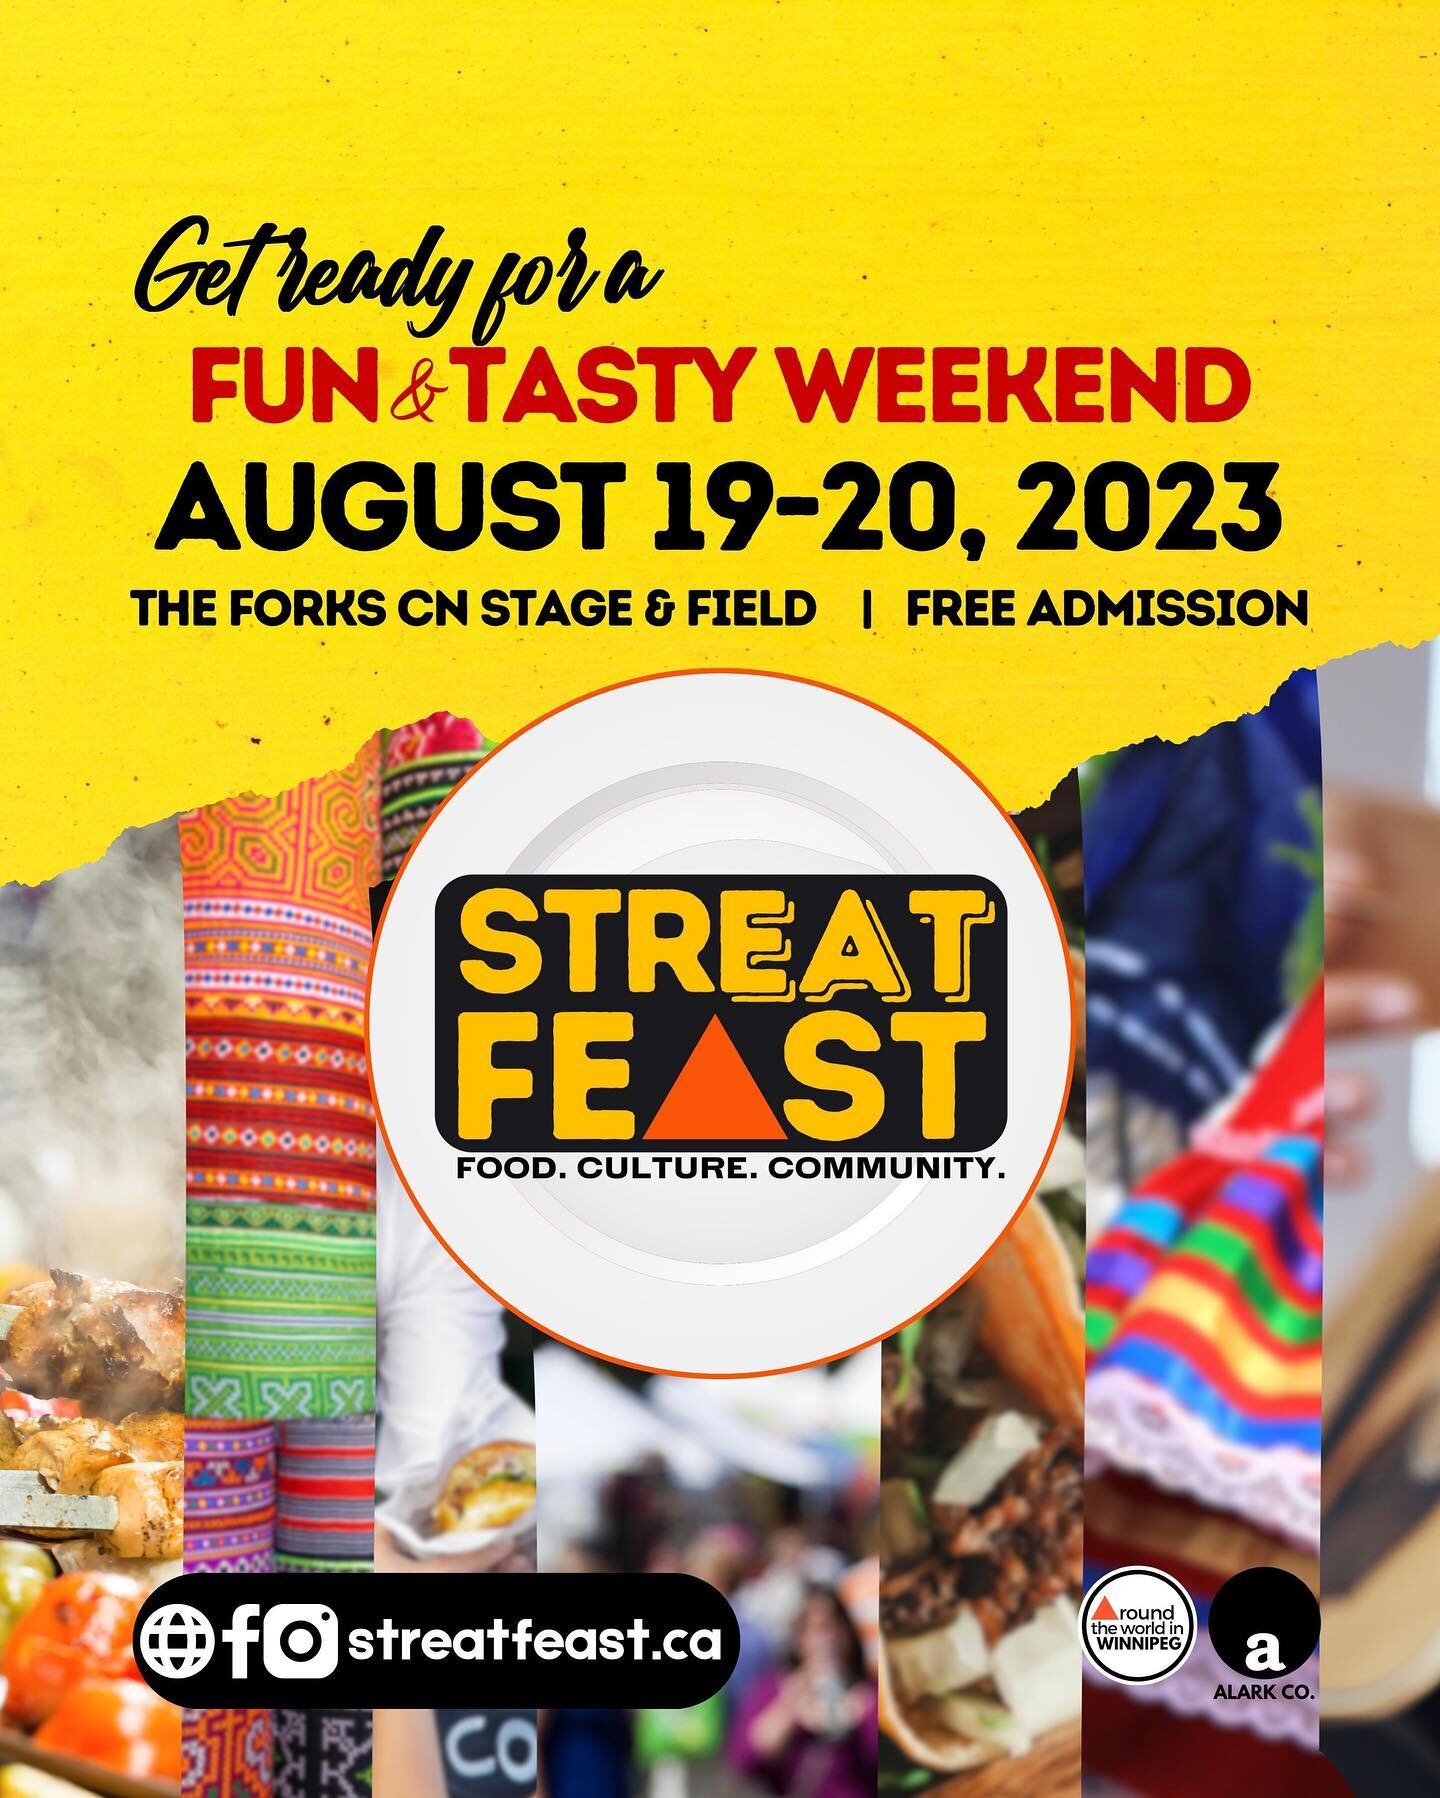 🌎 GET READY FOR A FUN &amp; TASTY WEEKEND IN AUGUST! @streatfeast.ca
JOIN us in celebrating a weekend of food, culture and community in the heart of Winnipeg!

Explore a world of cultures and delight your senses! Winnipeg, let us SIP, SAVOUR, &amp; 